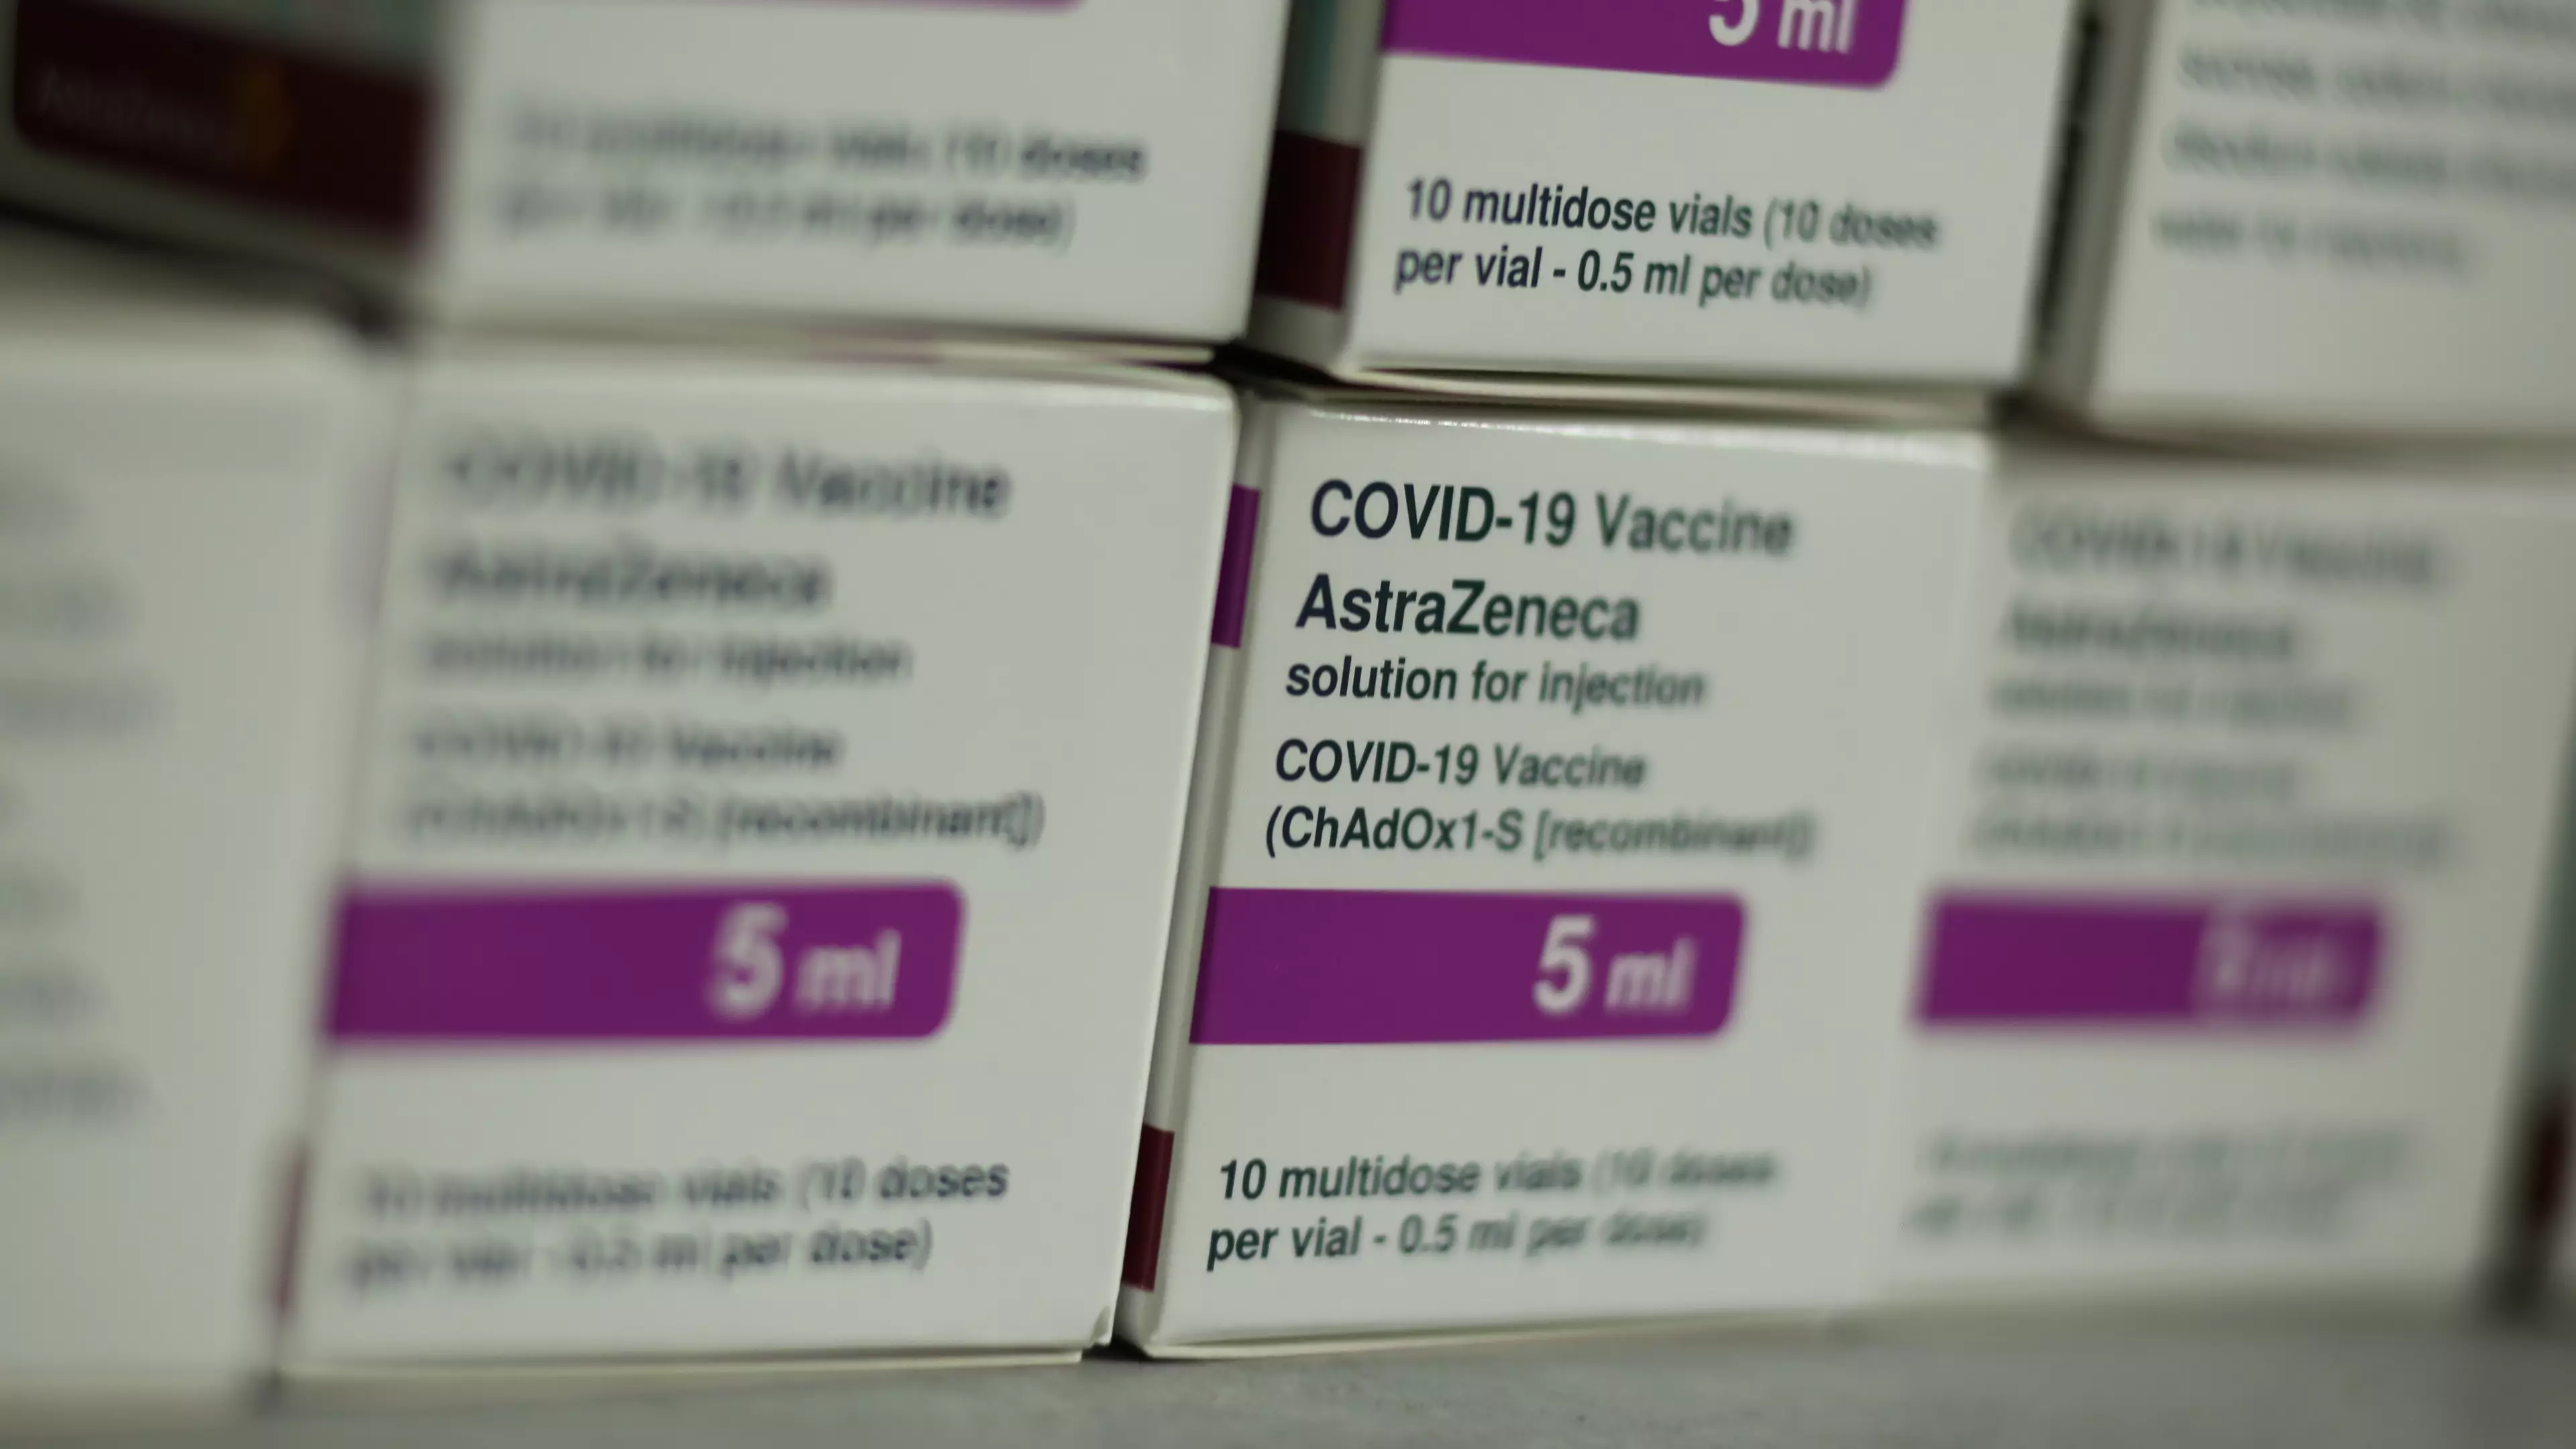 Under-30s To Be Offered Alternative To Oxford/AstraZeneca Vaccine